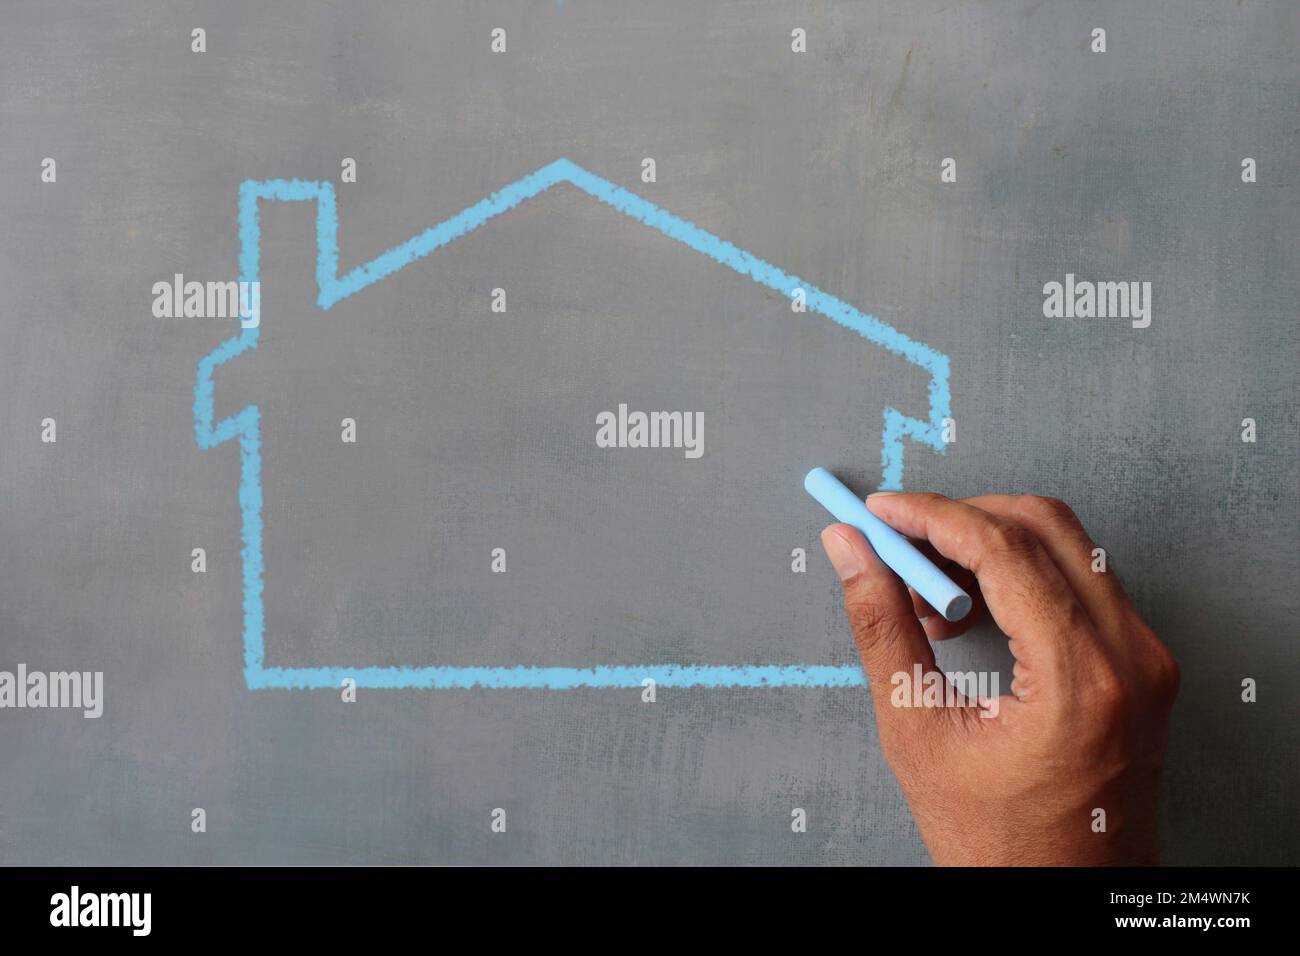 Top view image of hand drawing house icon on chalkboard. Copy space for text Stock Photo